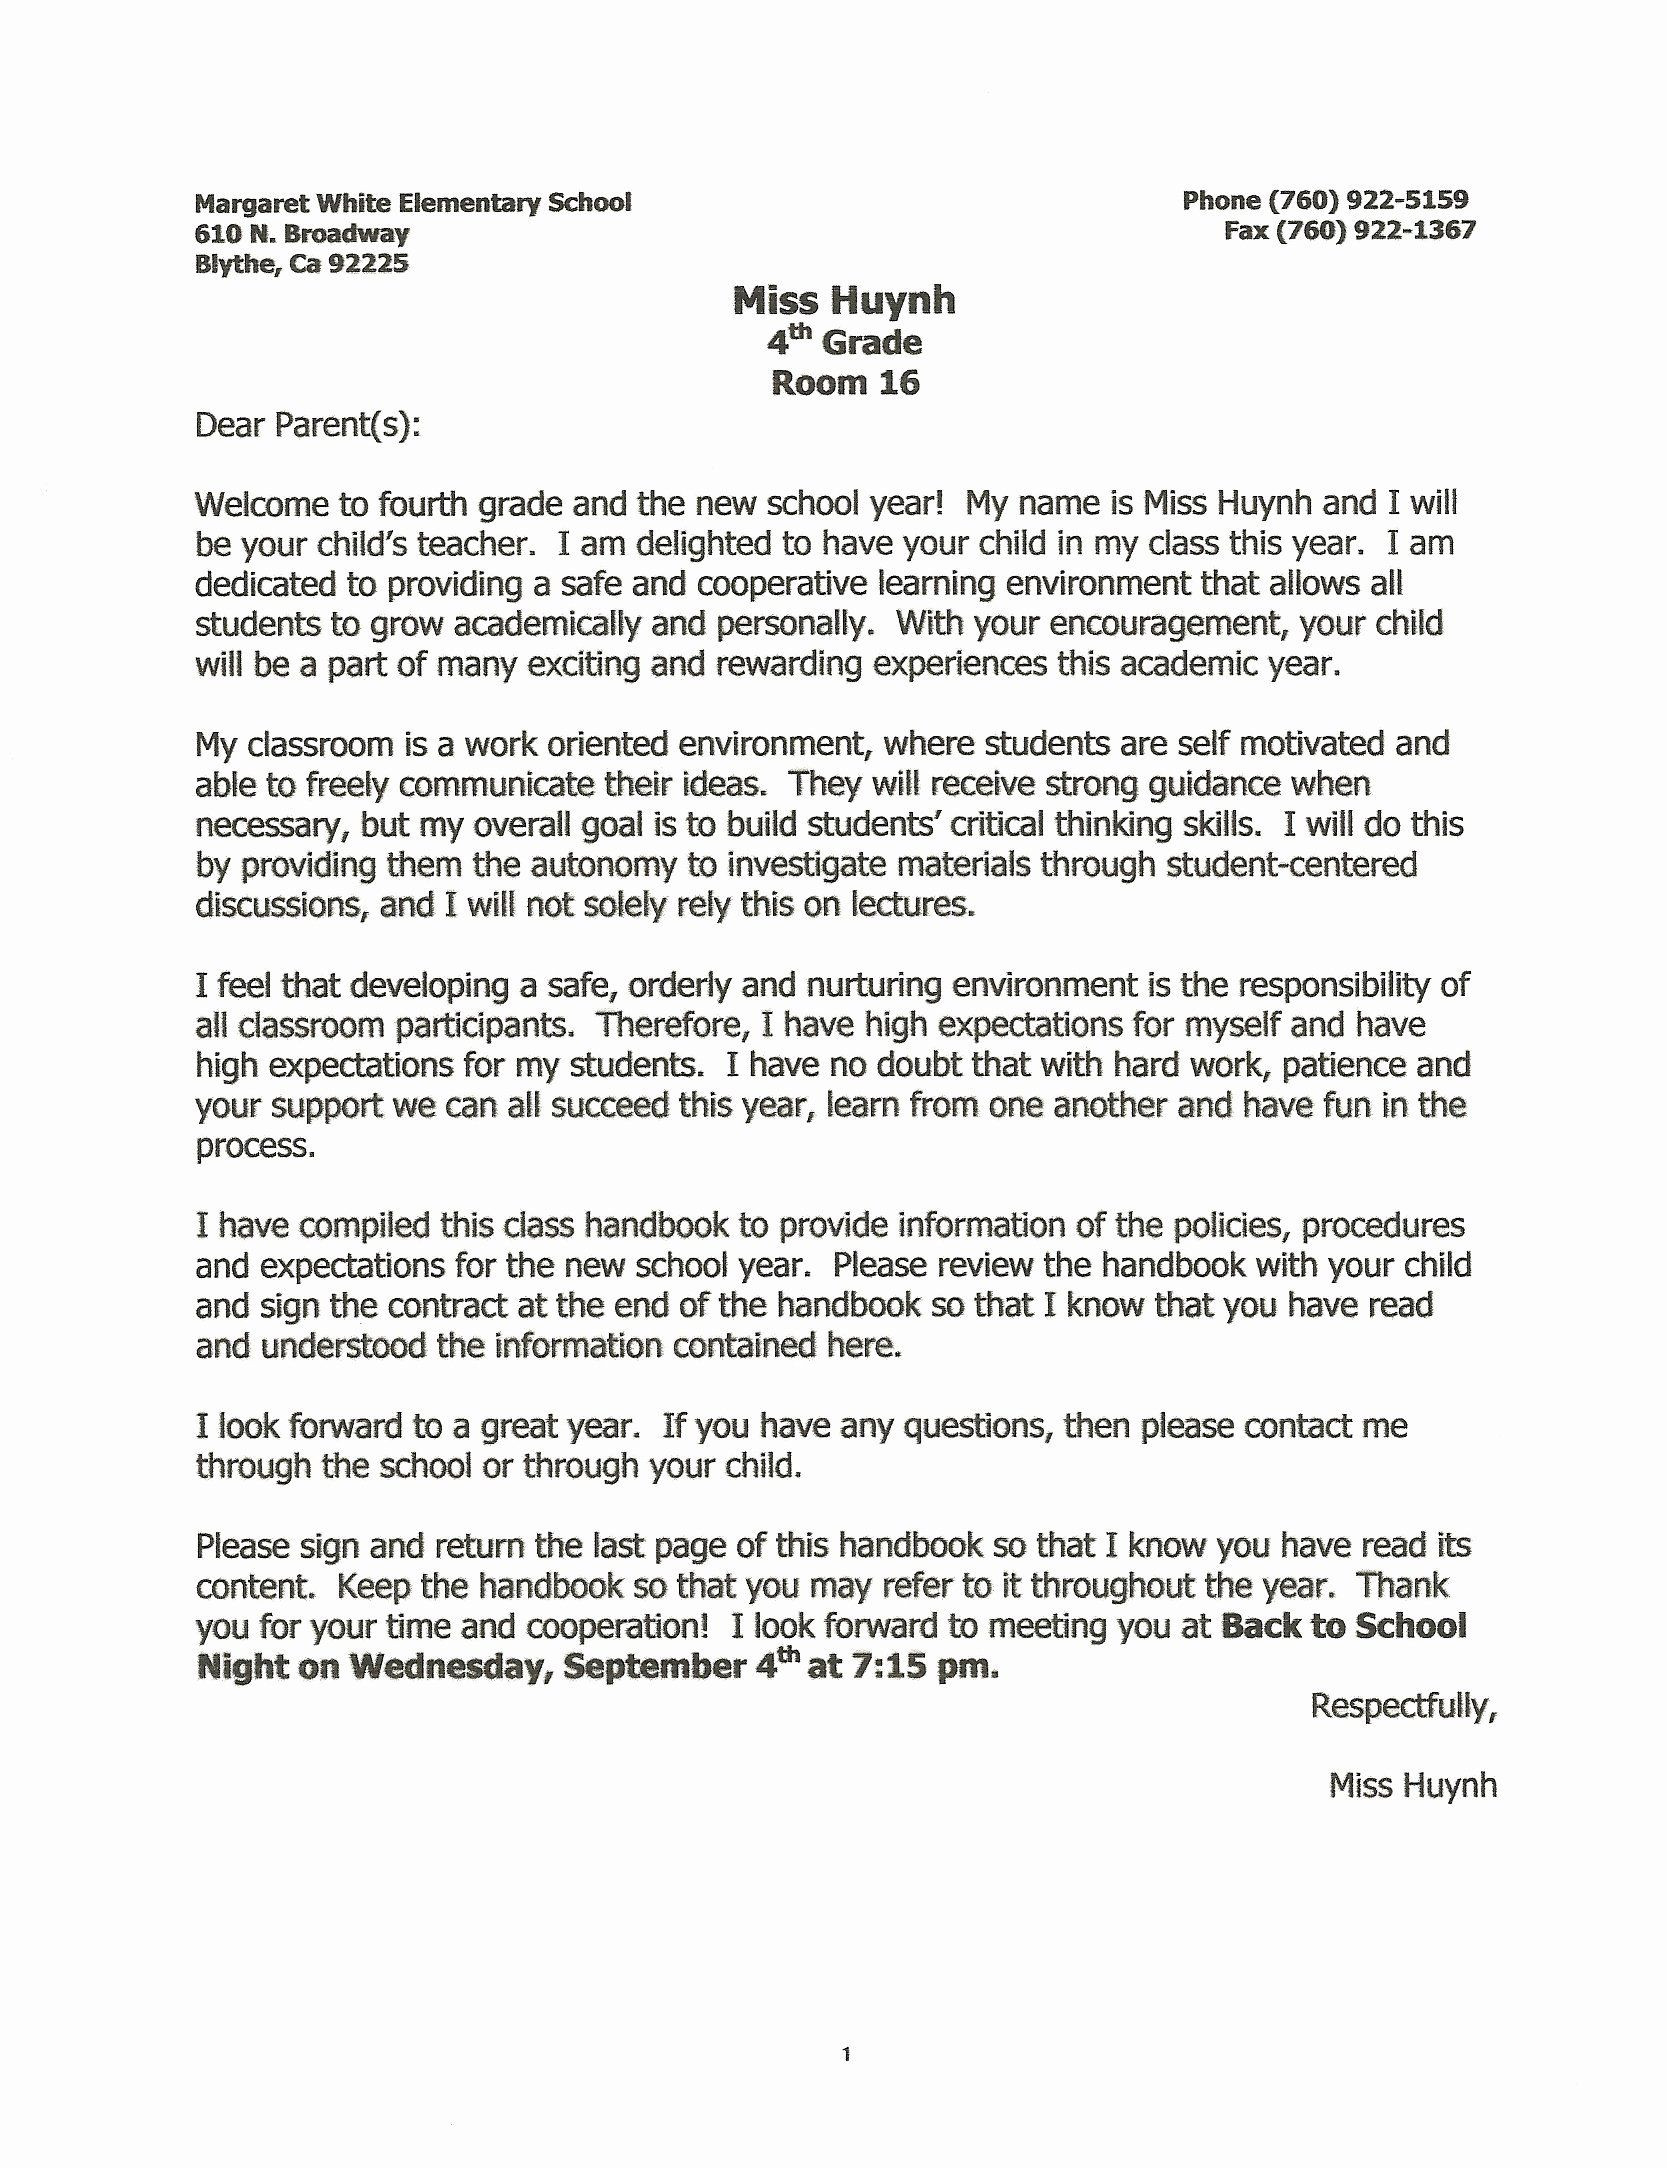 Letters to Parents Template Letter to My Parents Best Classroom Management In 2020